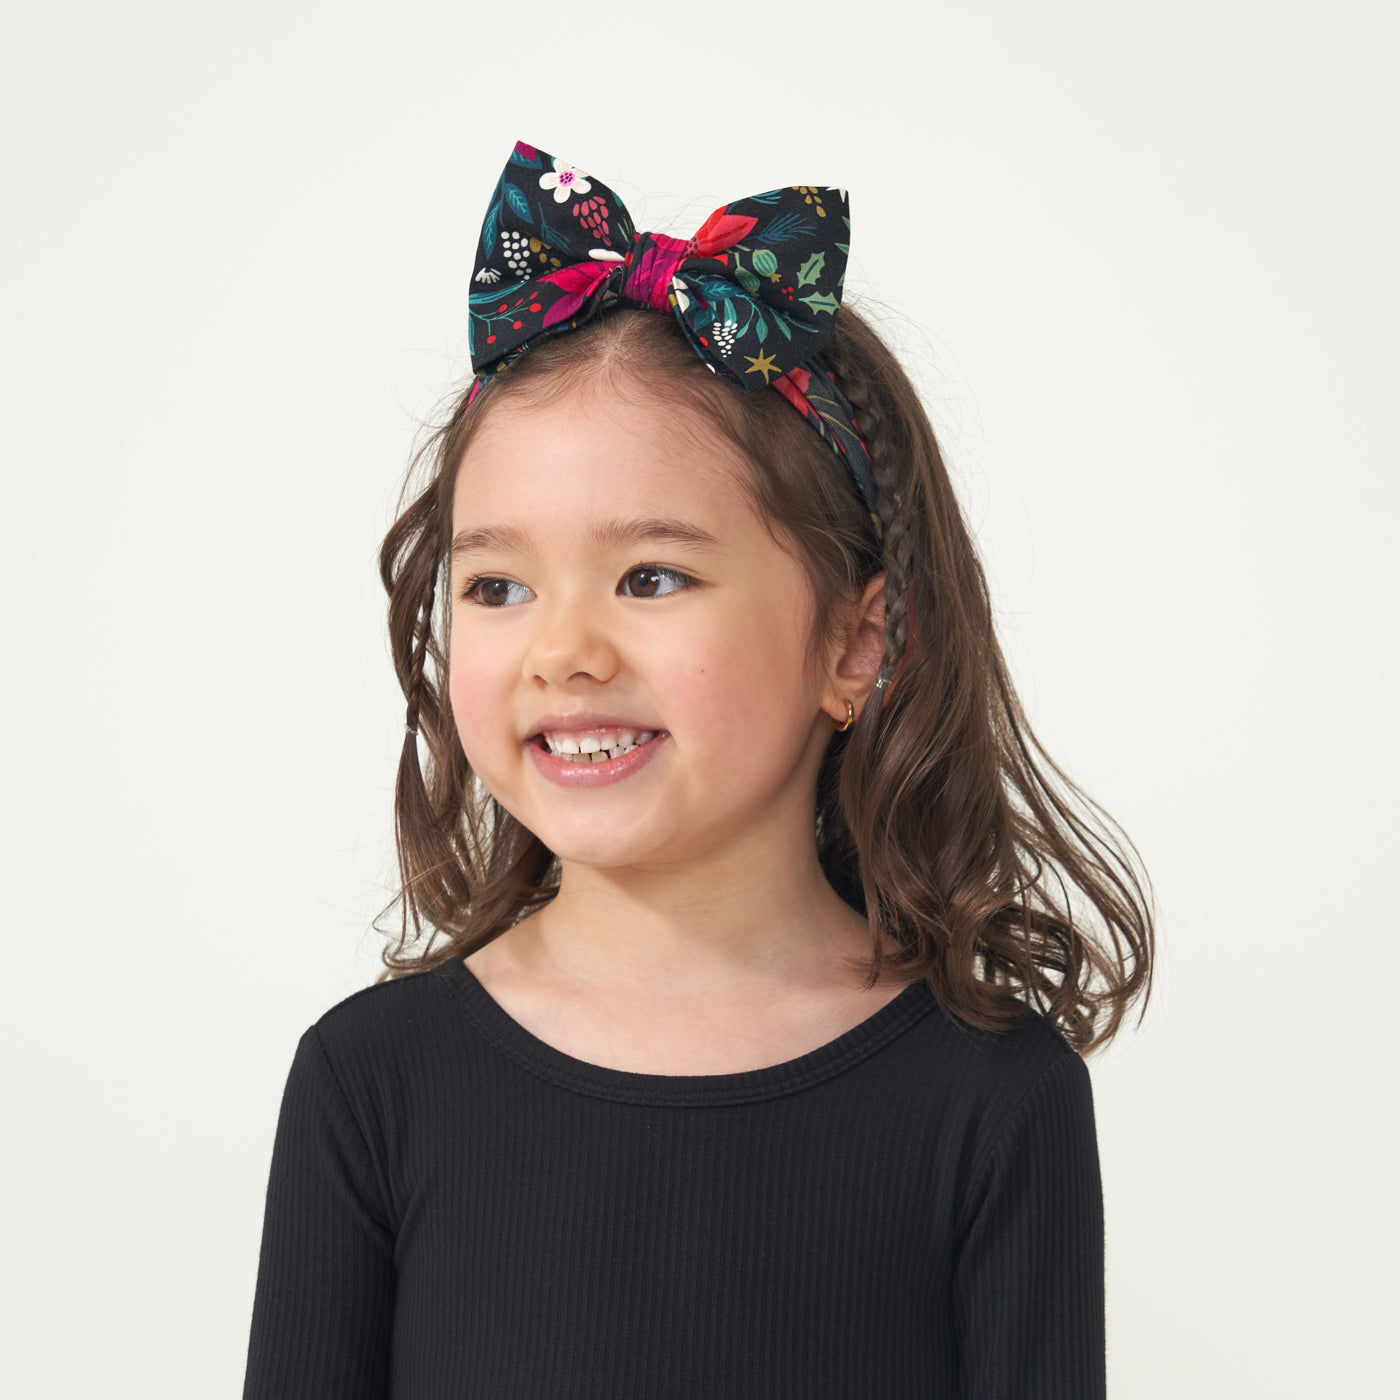 Child wearing a Black Ribbed Twirl dress paired with a Berry Merry Luxe Bow headband 